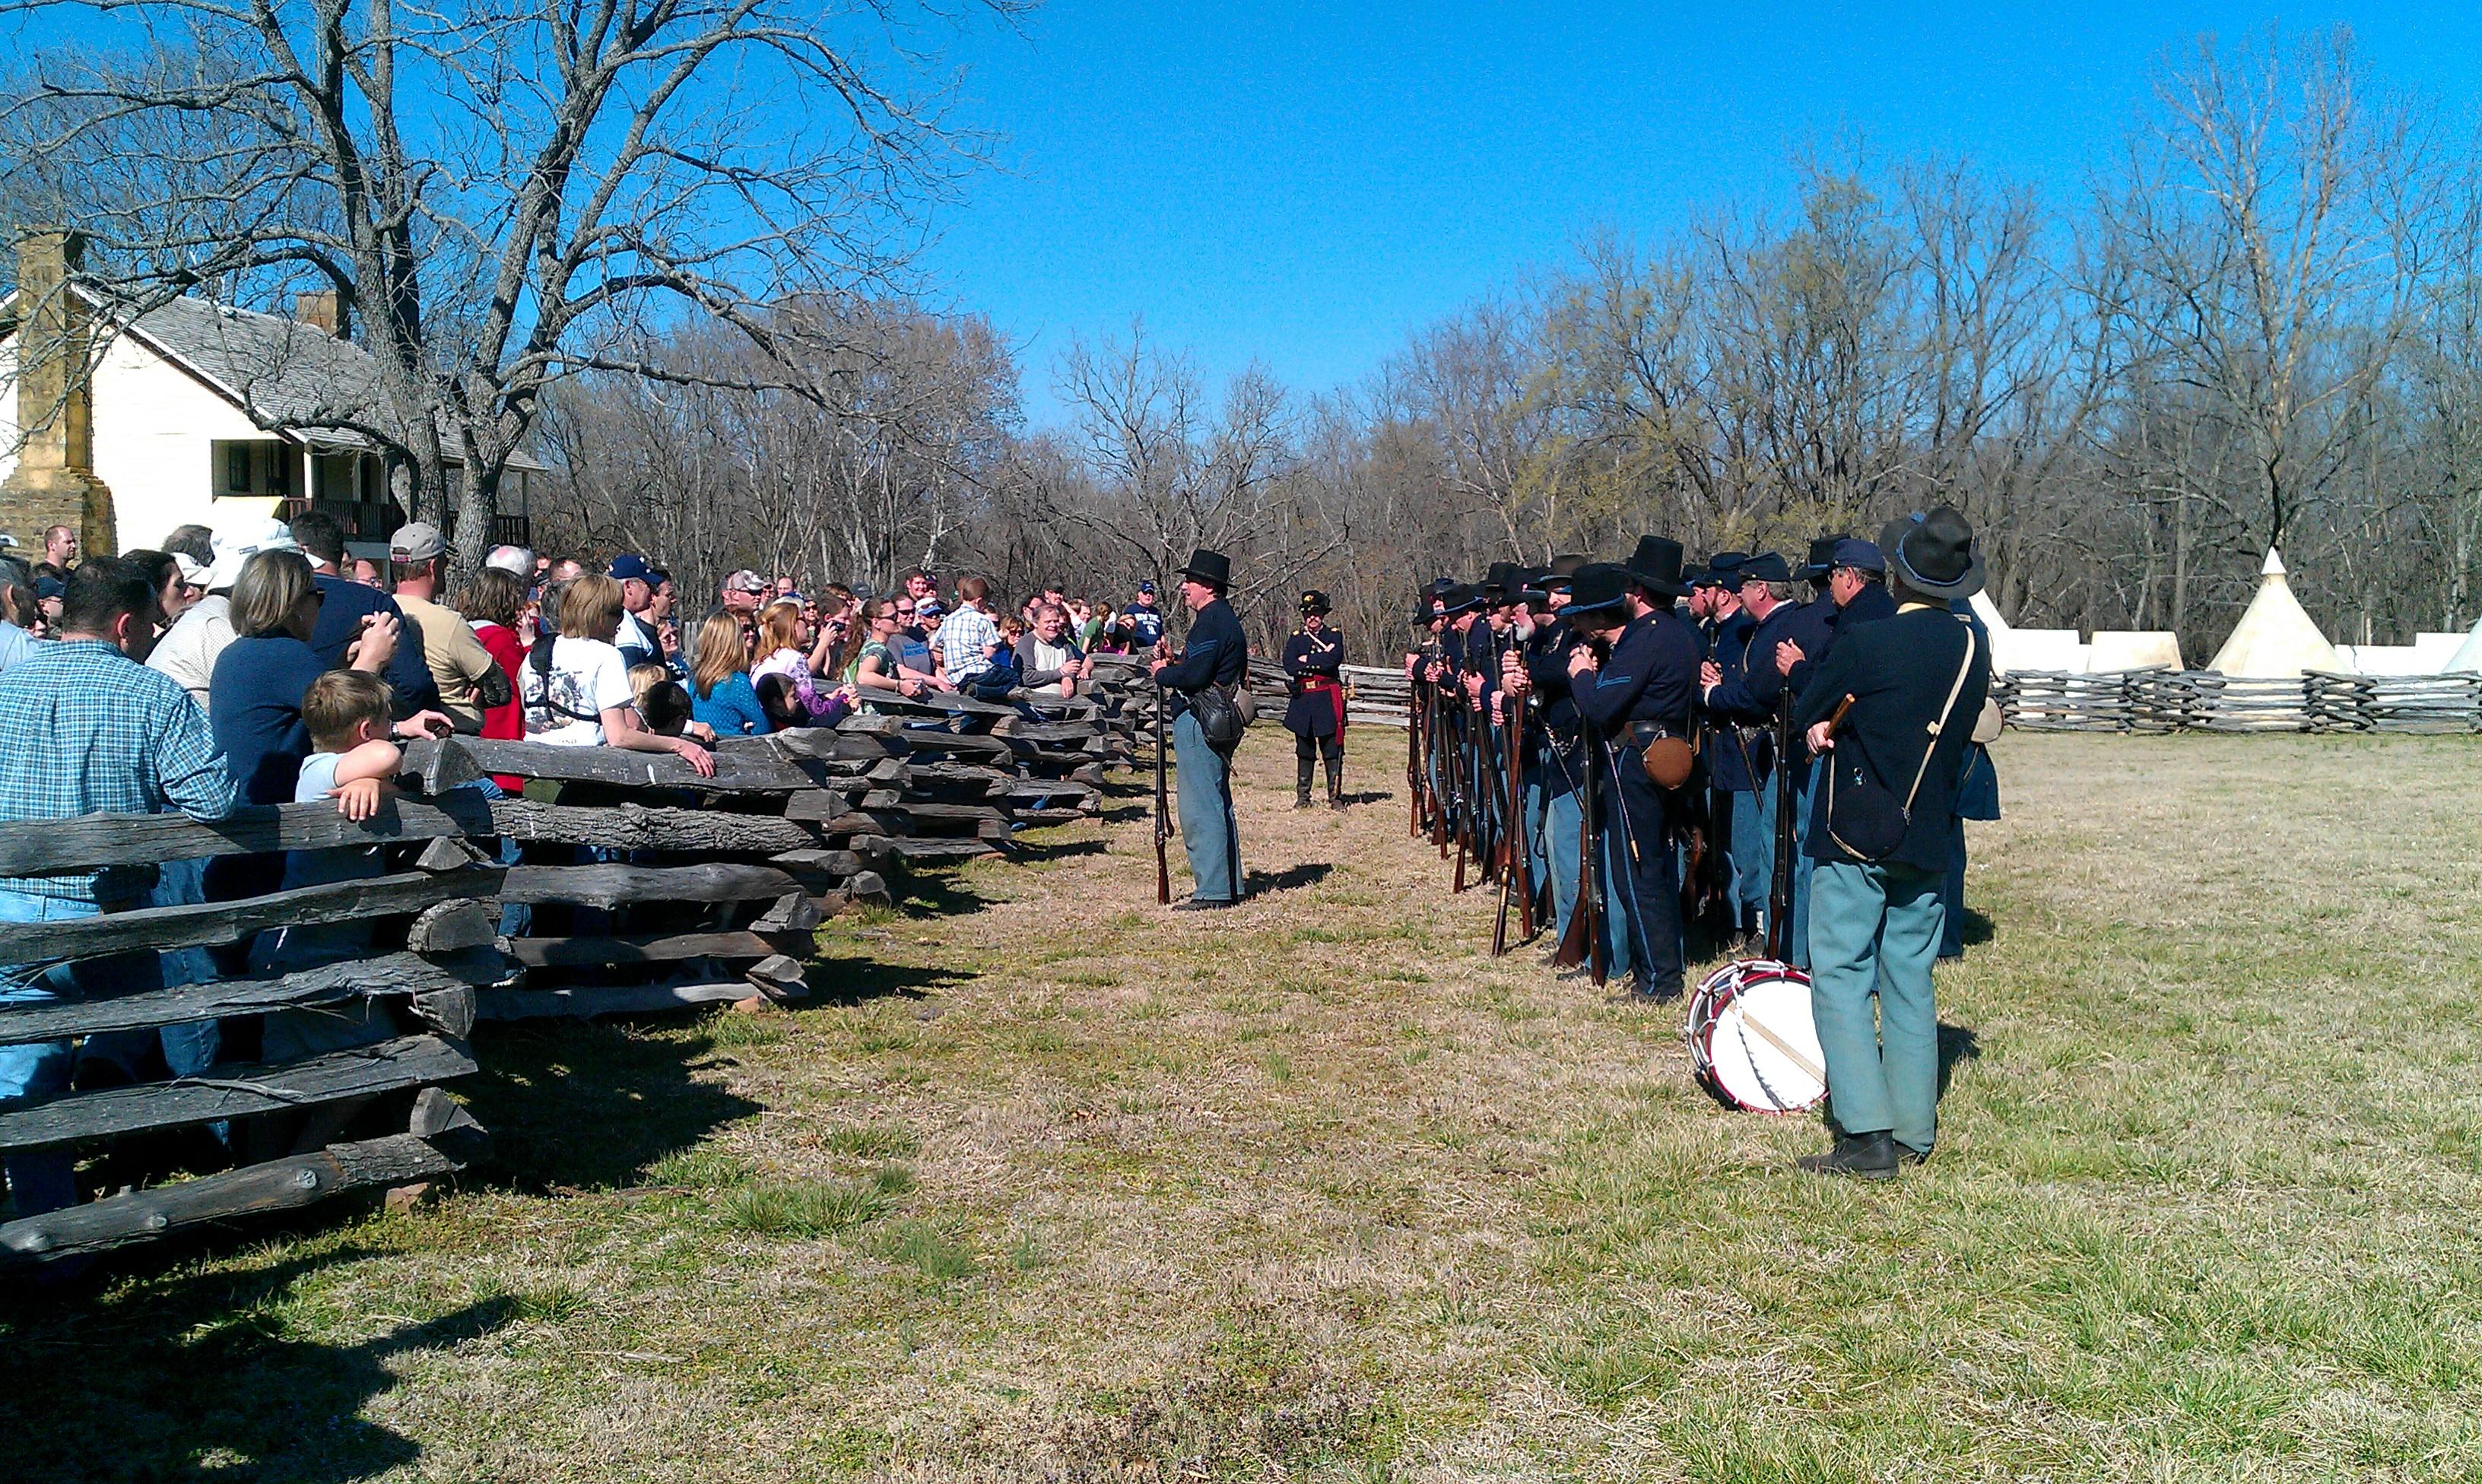 Photo of Union Infantrymen reenactors standing in front of building with large crowd.